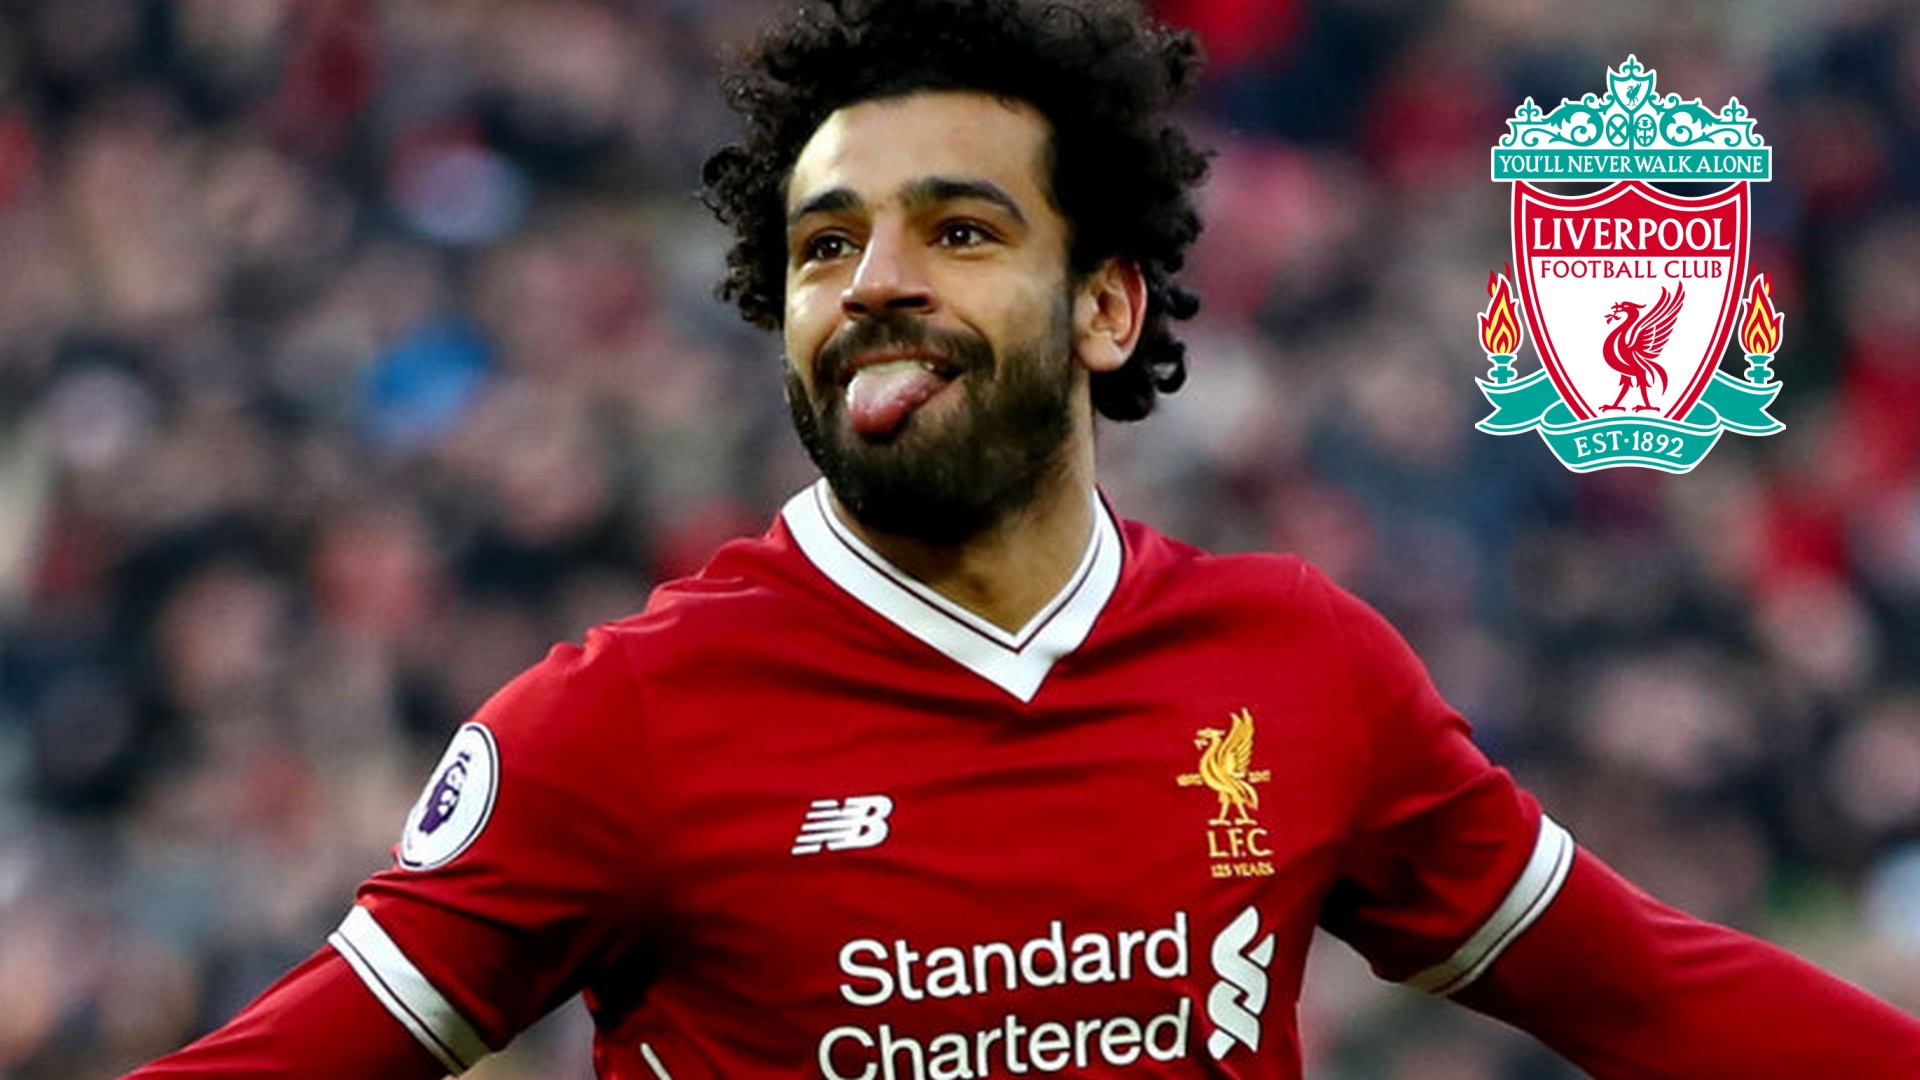 Liverpool Mohamed Salah HD Wallpaper With Resolution 1920X1080 pixel. You can make this wallpaper for your Desktop Computer Backgrounds, Mac Wallpapers, Android Lock screen or iPhone Screensavers